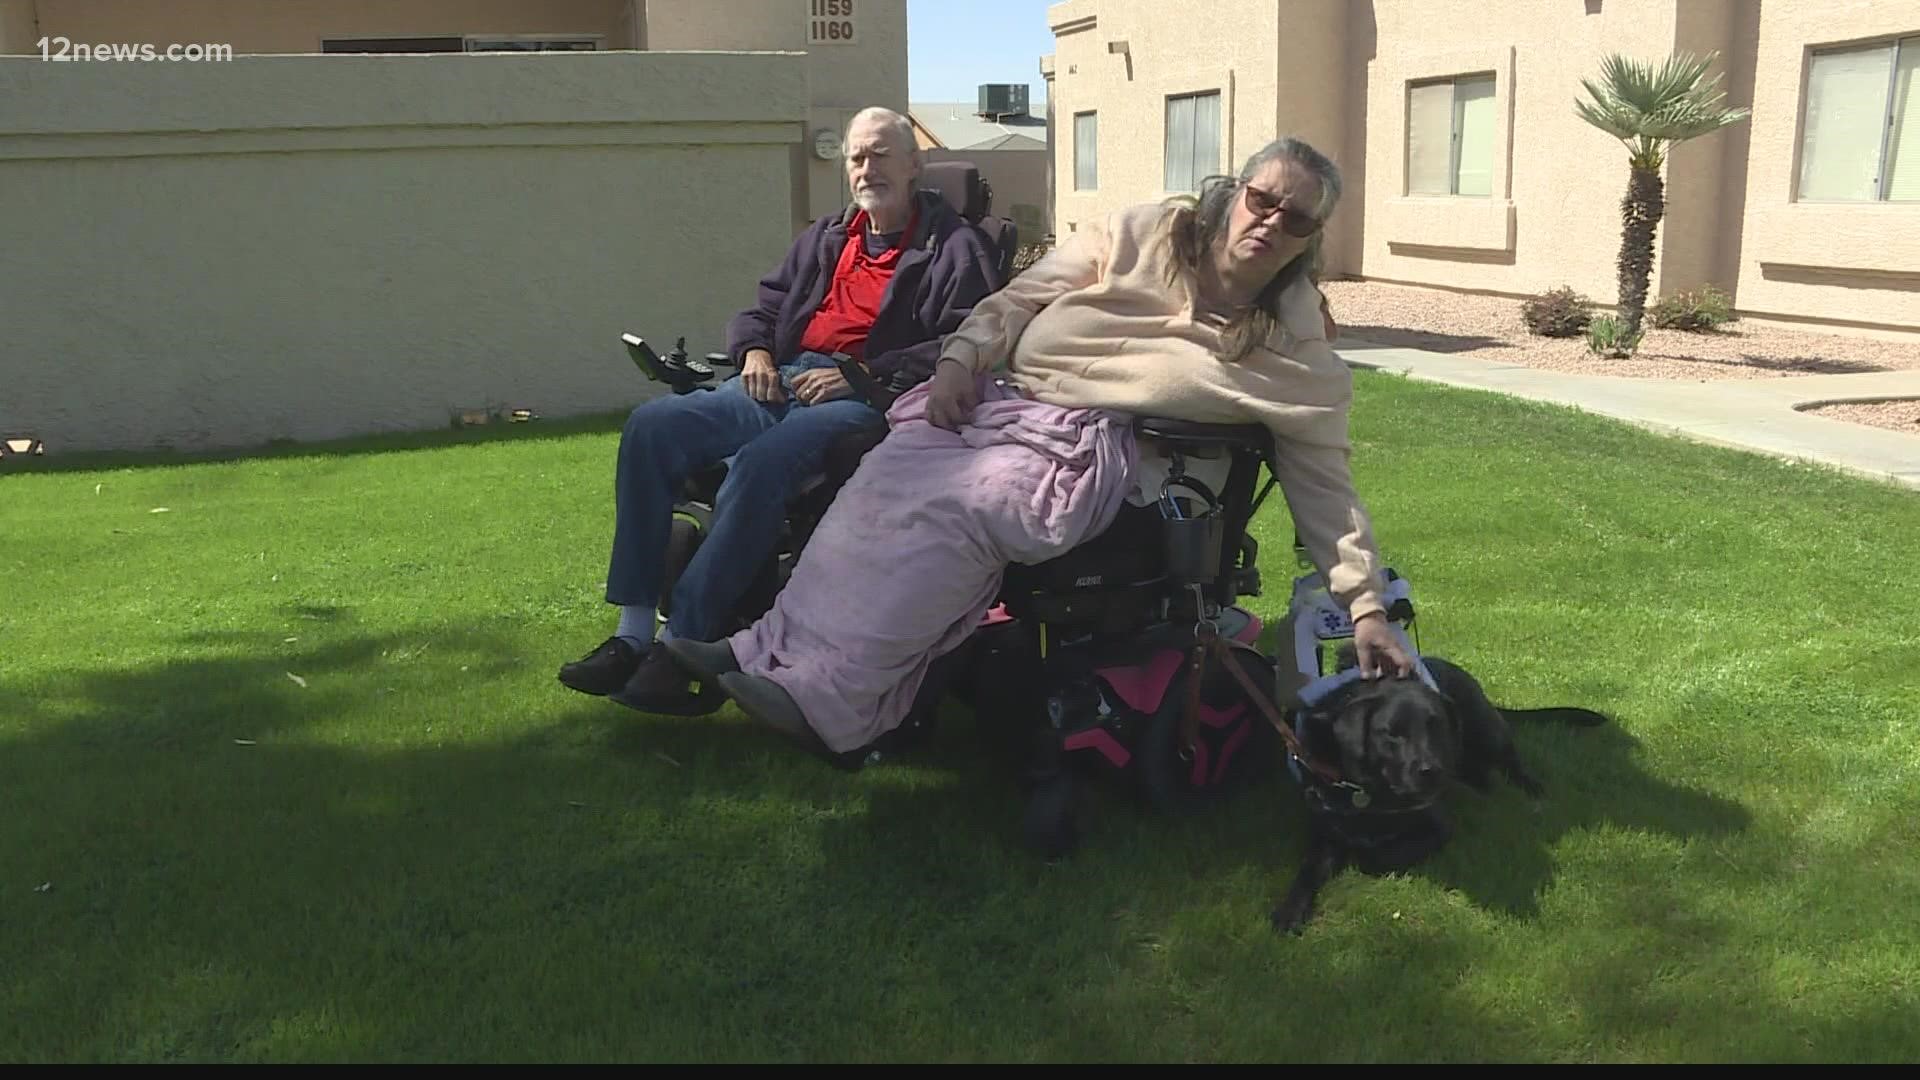 With skyrocketing housing prices, more and more buyers and renters are feeling pushed out of the market. One disabled Valley couple fears homelessness.